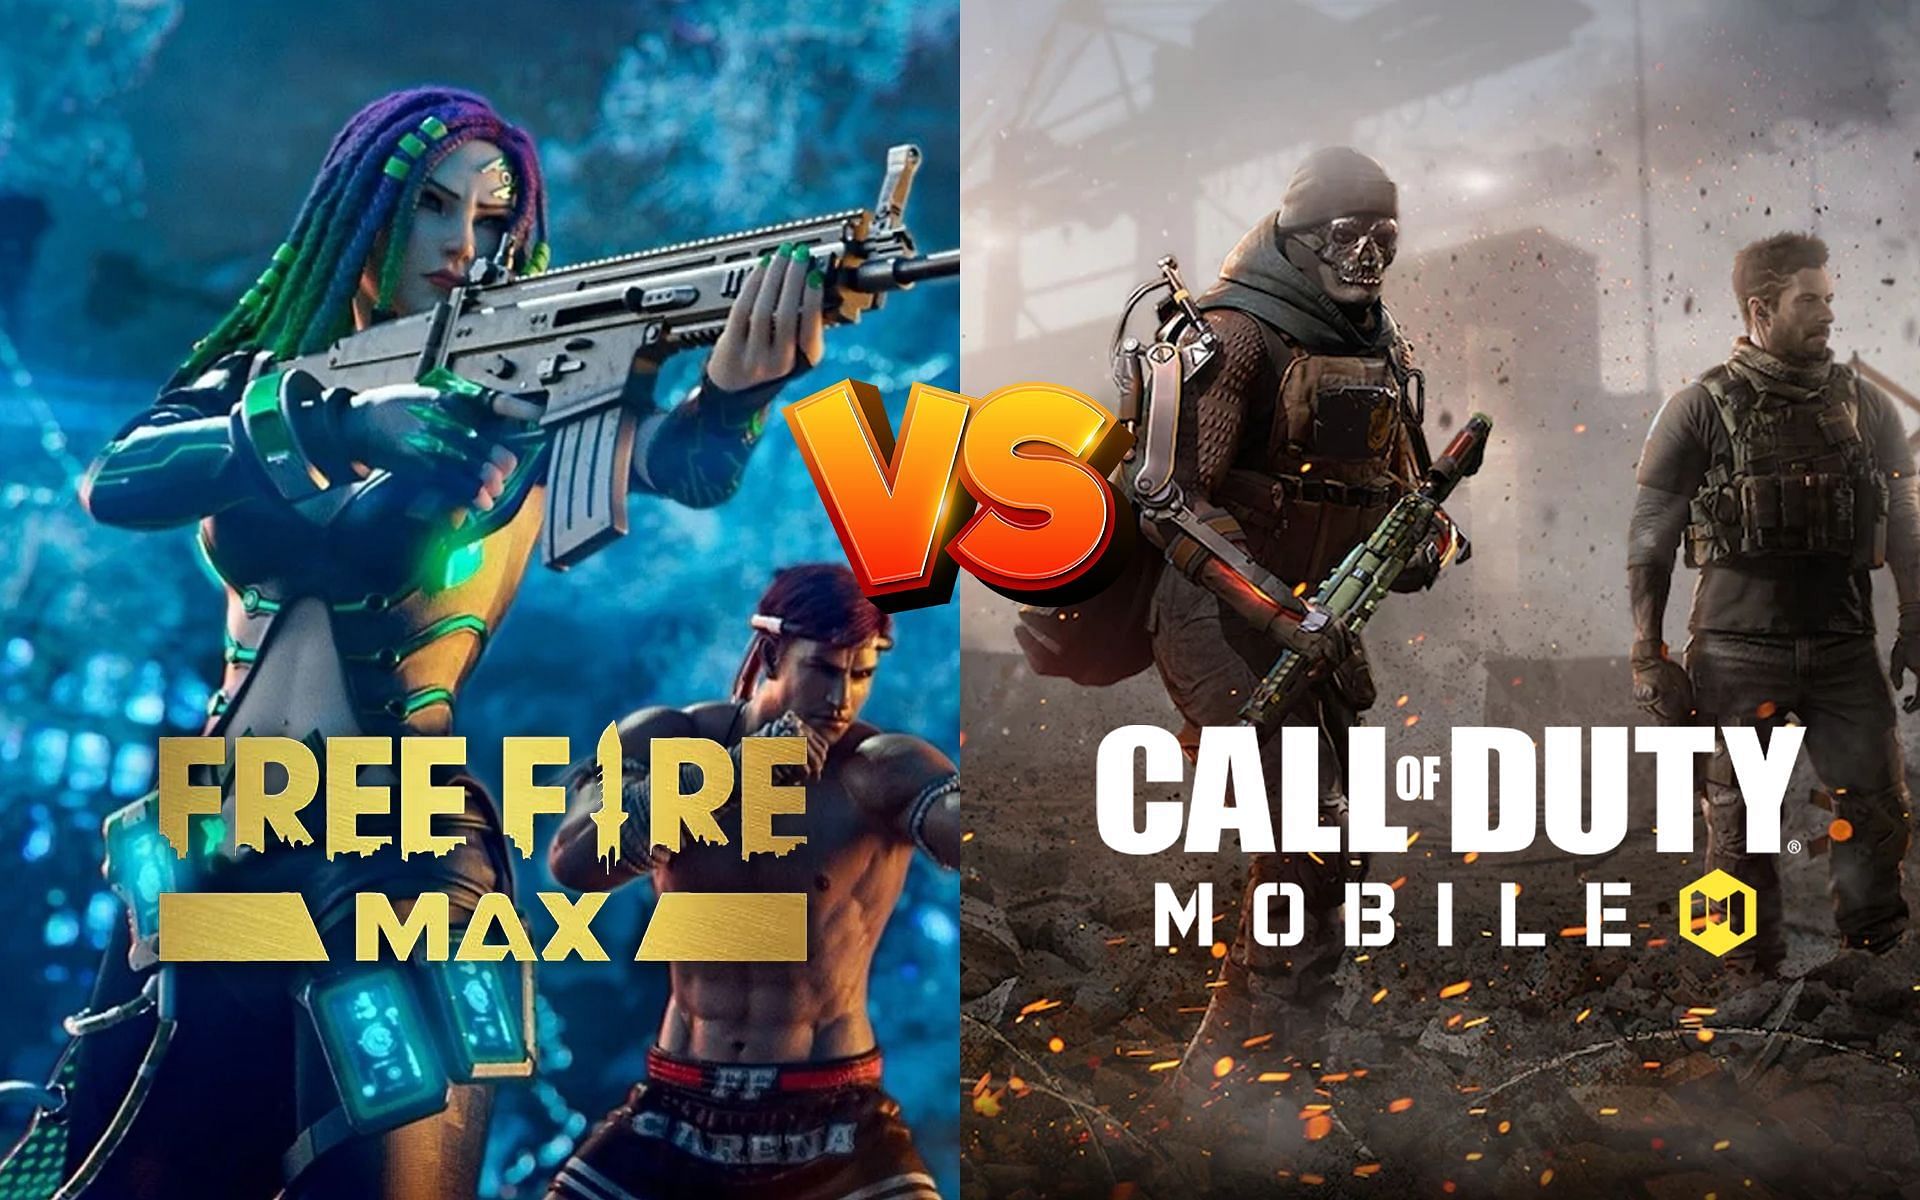 Here's how to play Squid Games mode on Garena Free Fire